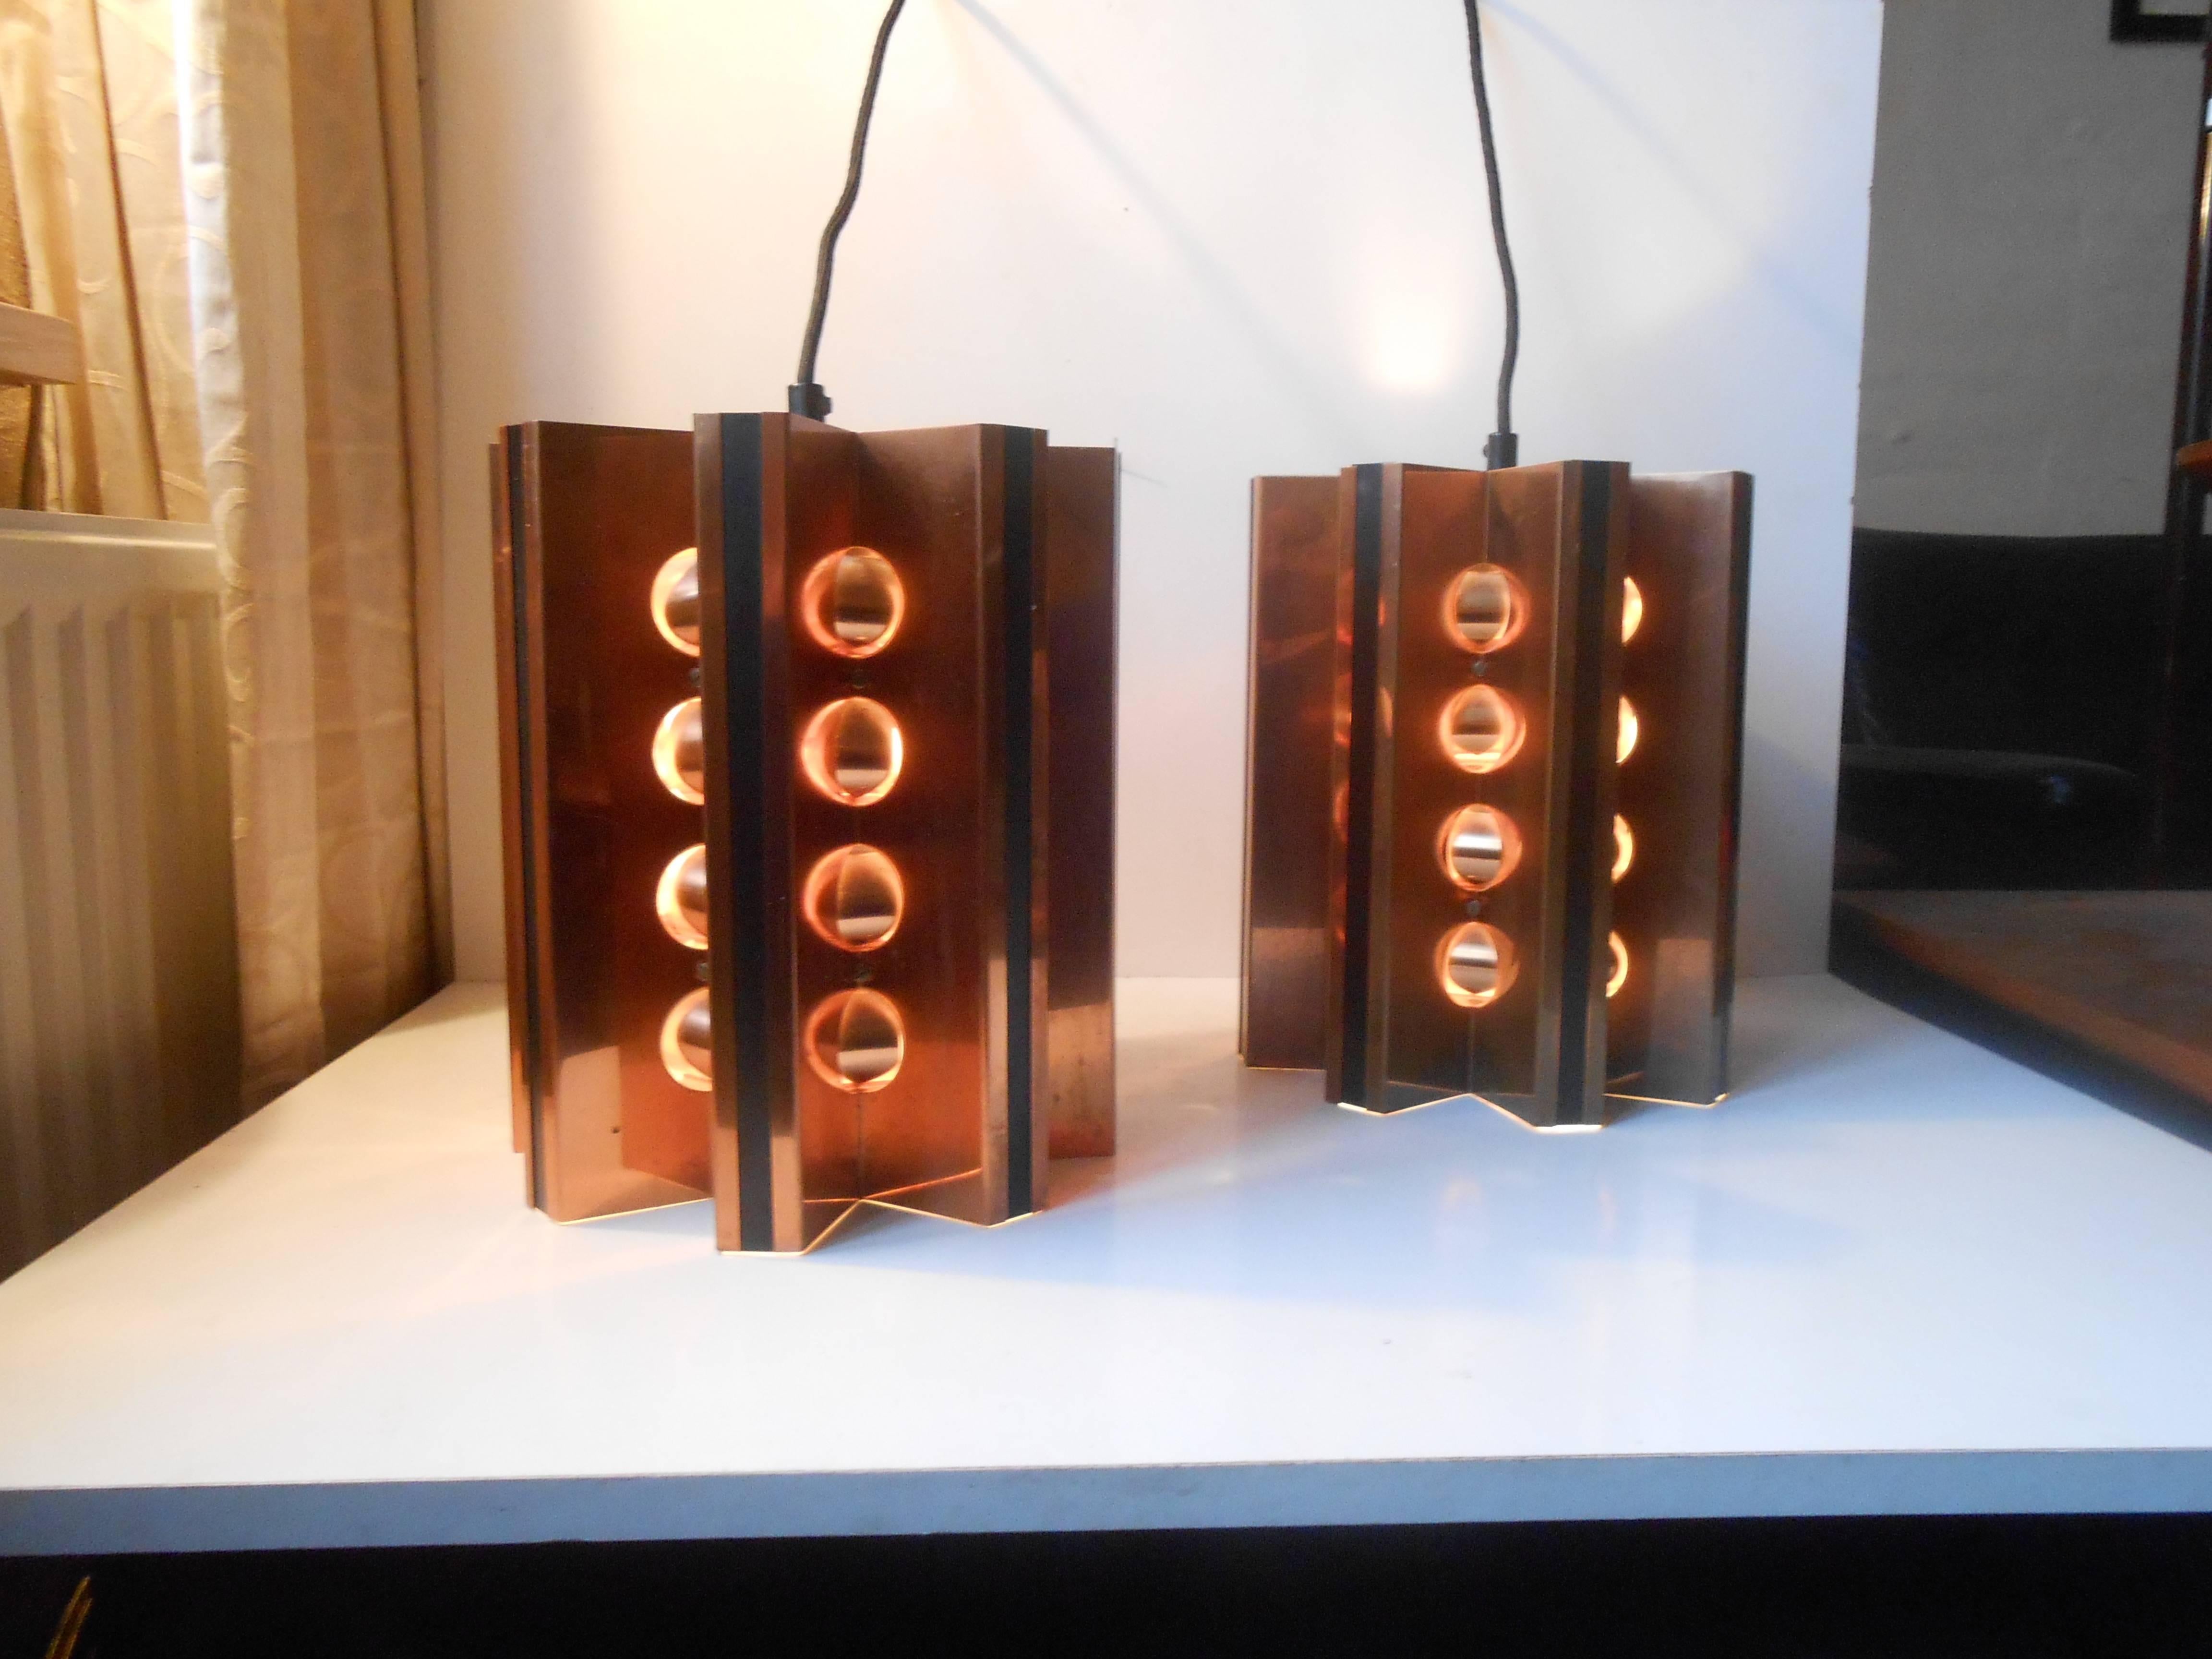 A pair of solid copper star-shaped pendant lights by danish Architect Werner Schou. Splendid condition with very light ware. Measurements: H 11 inches (28 cm), D 8.5 inches (22 cm).